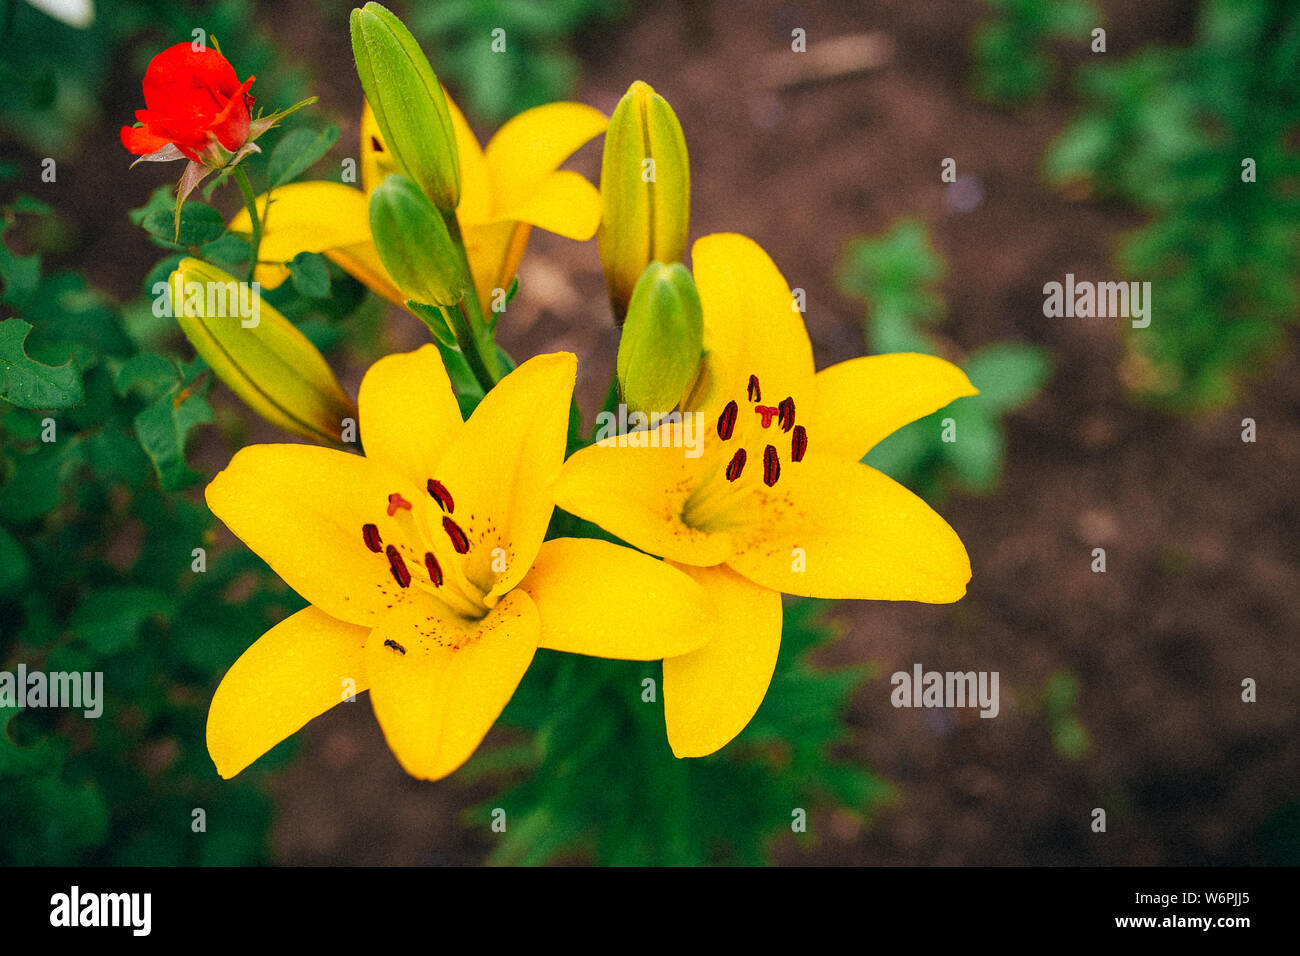 The flower of a yellow lily growing in a summer garden. Stock Photo